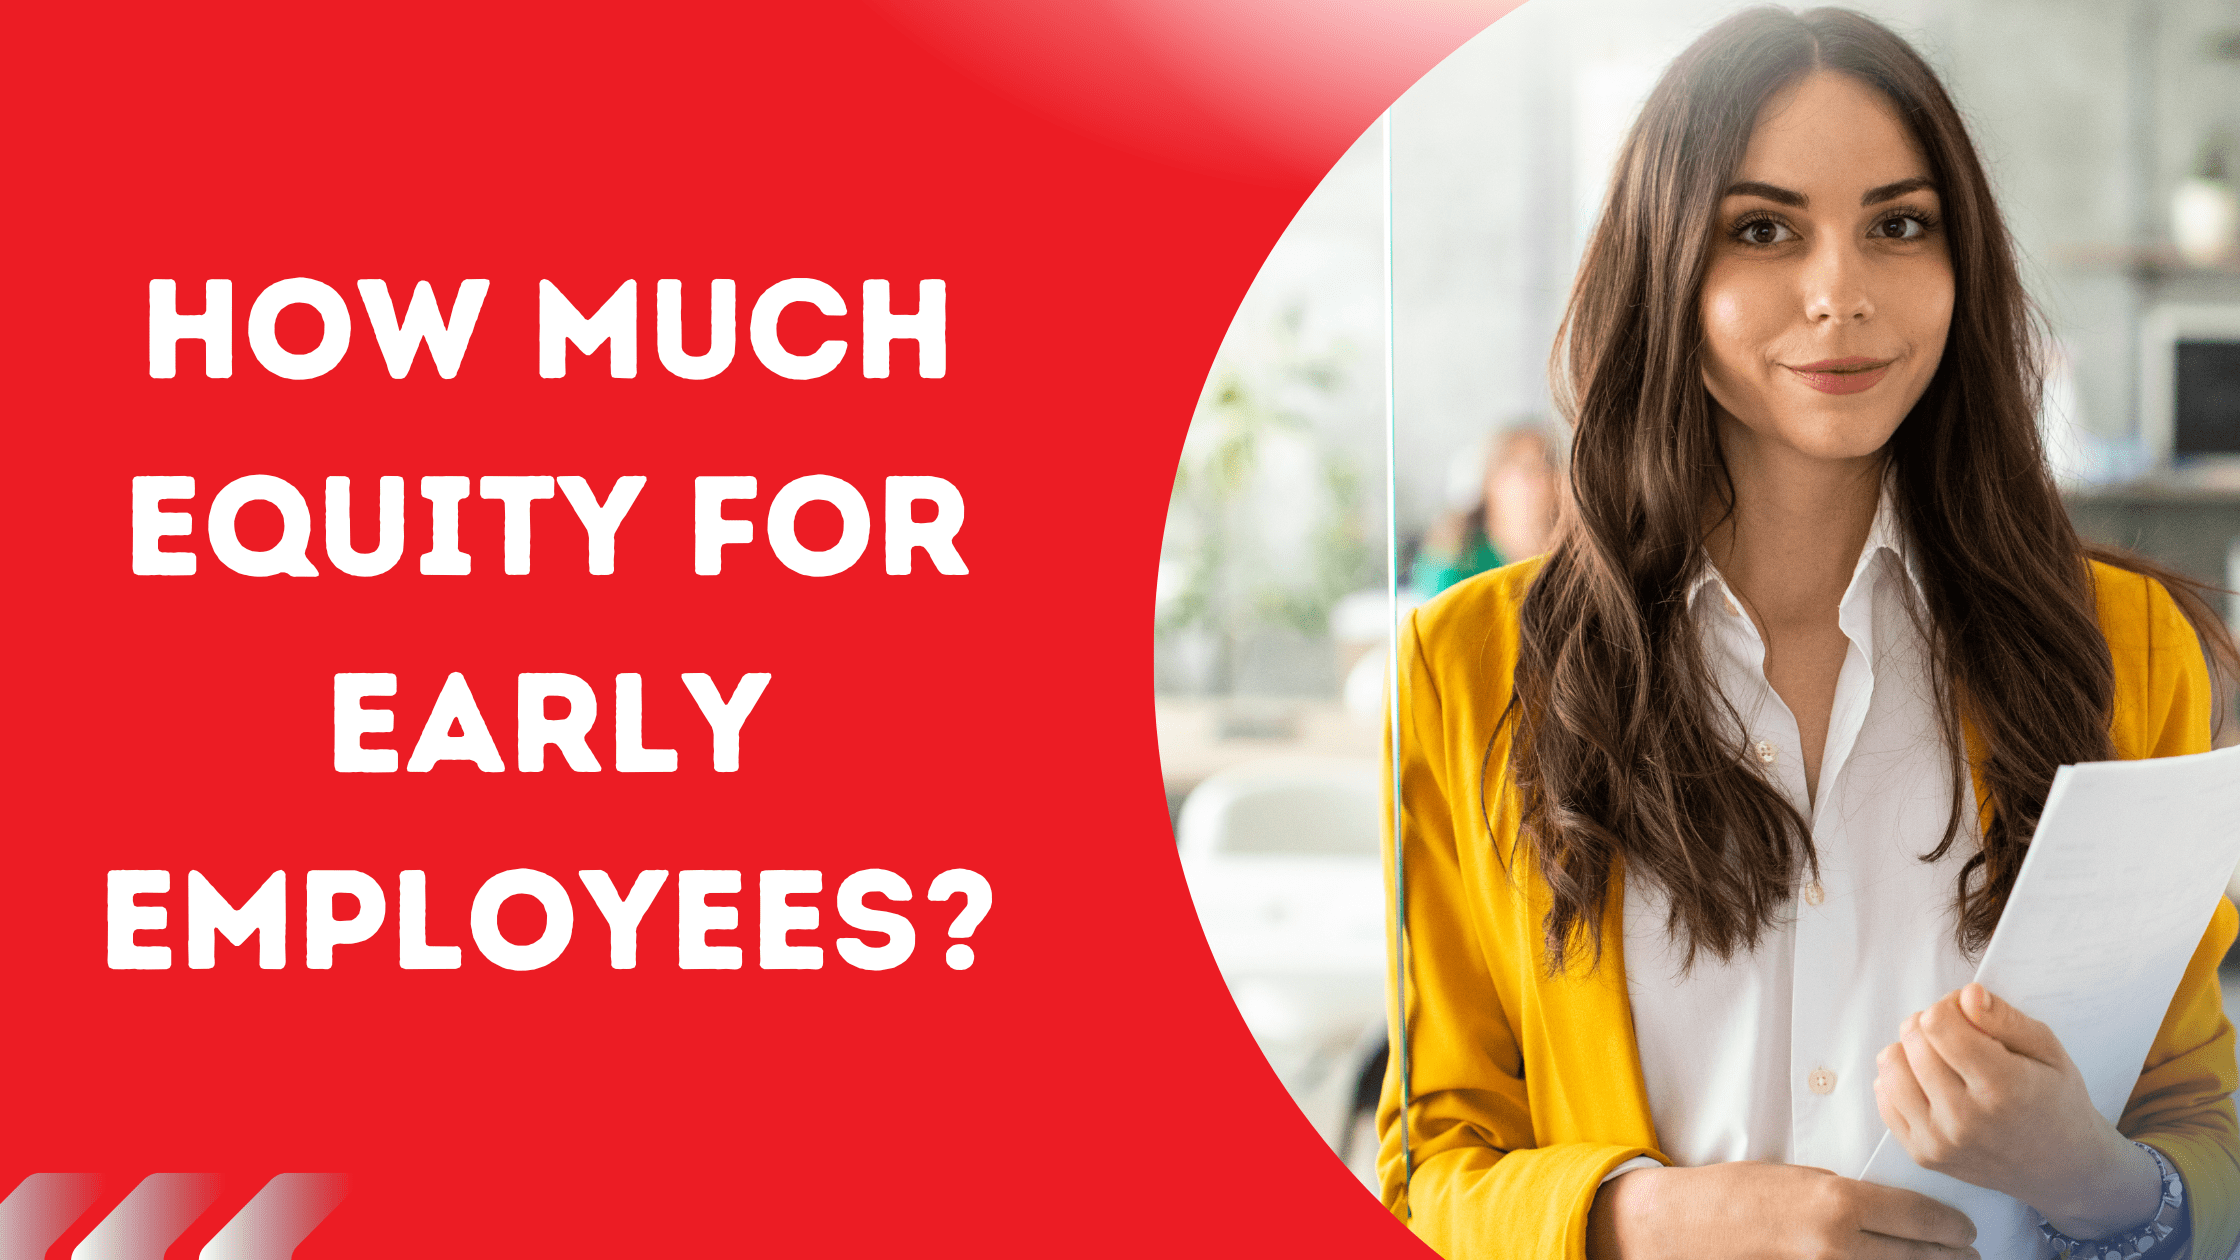 How Much Equity for Early Employees